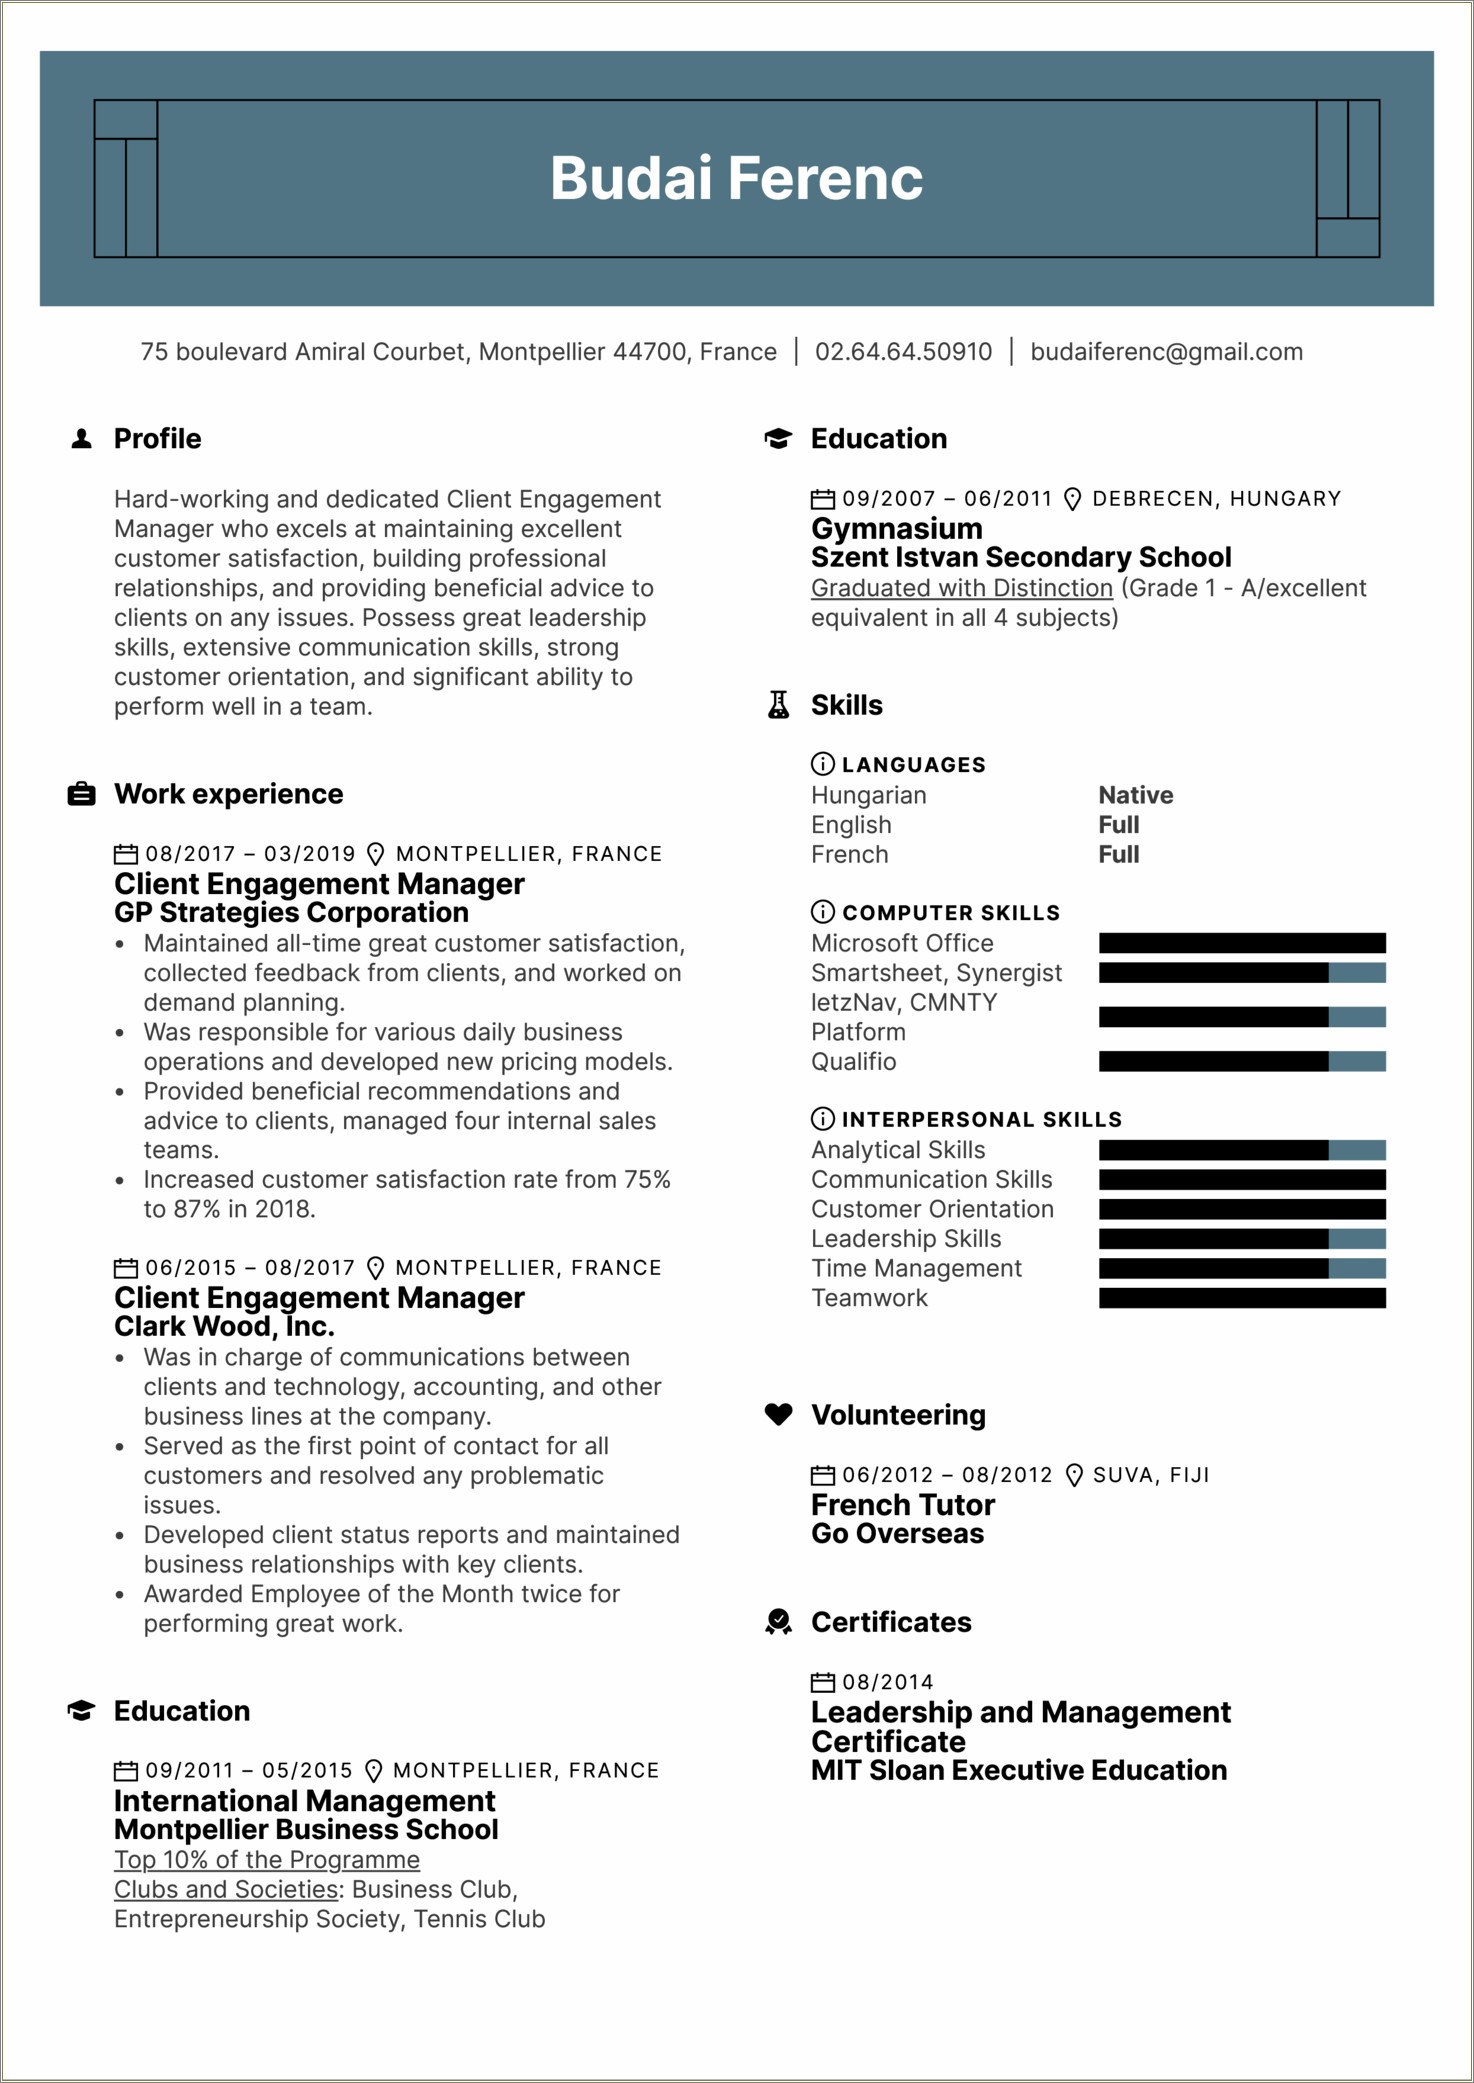 Is Supervisor Good For A Resume